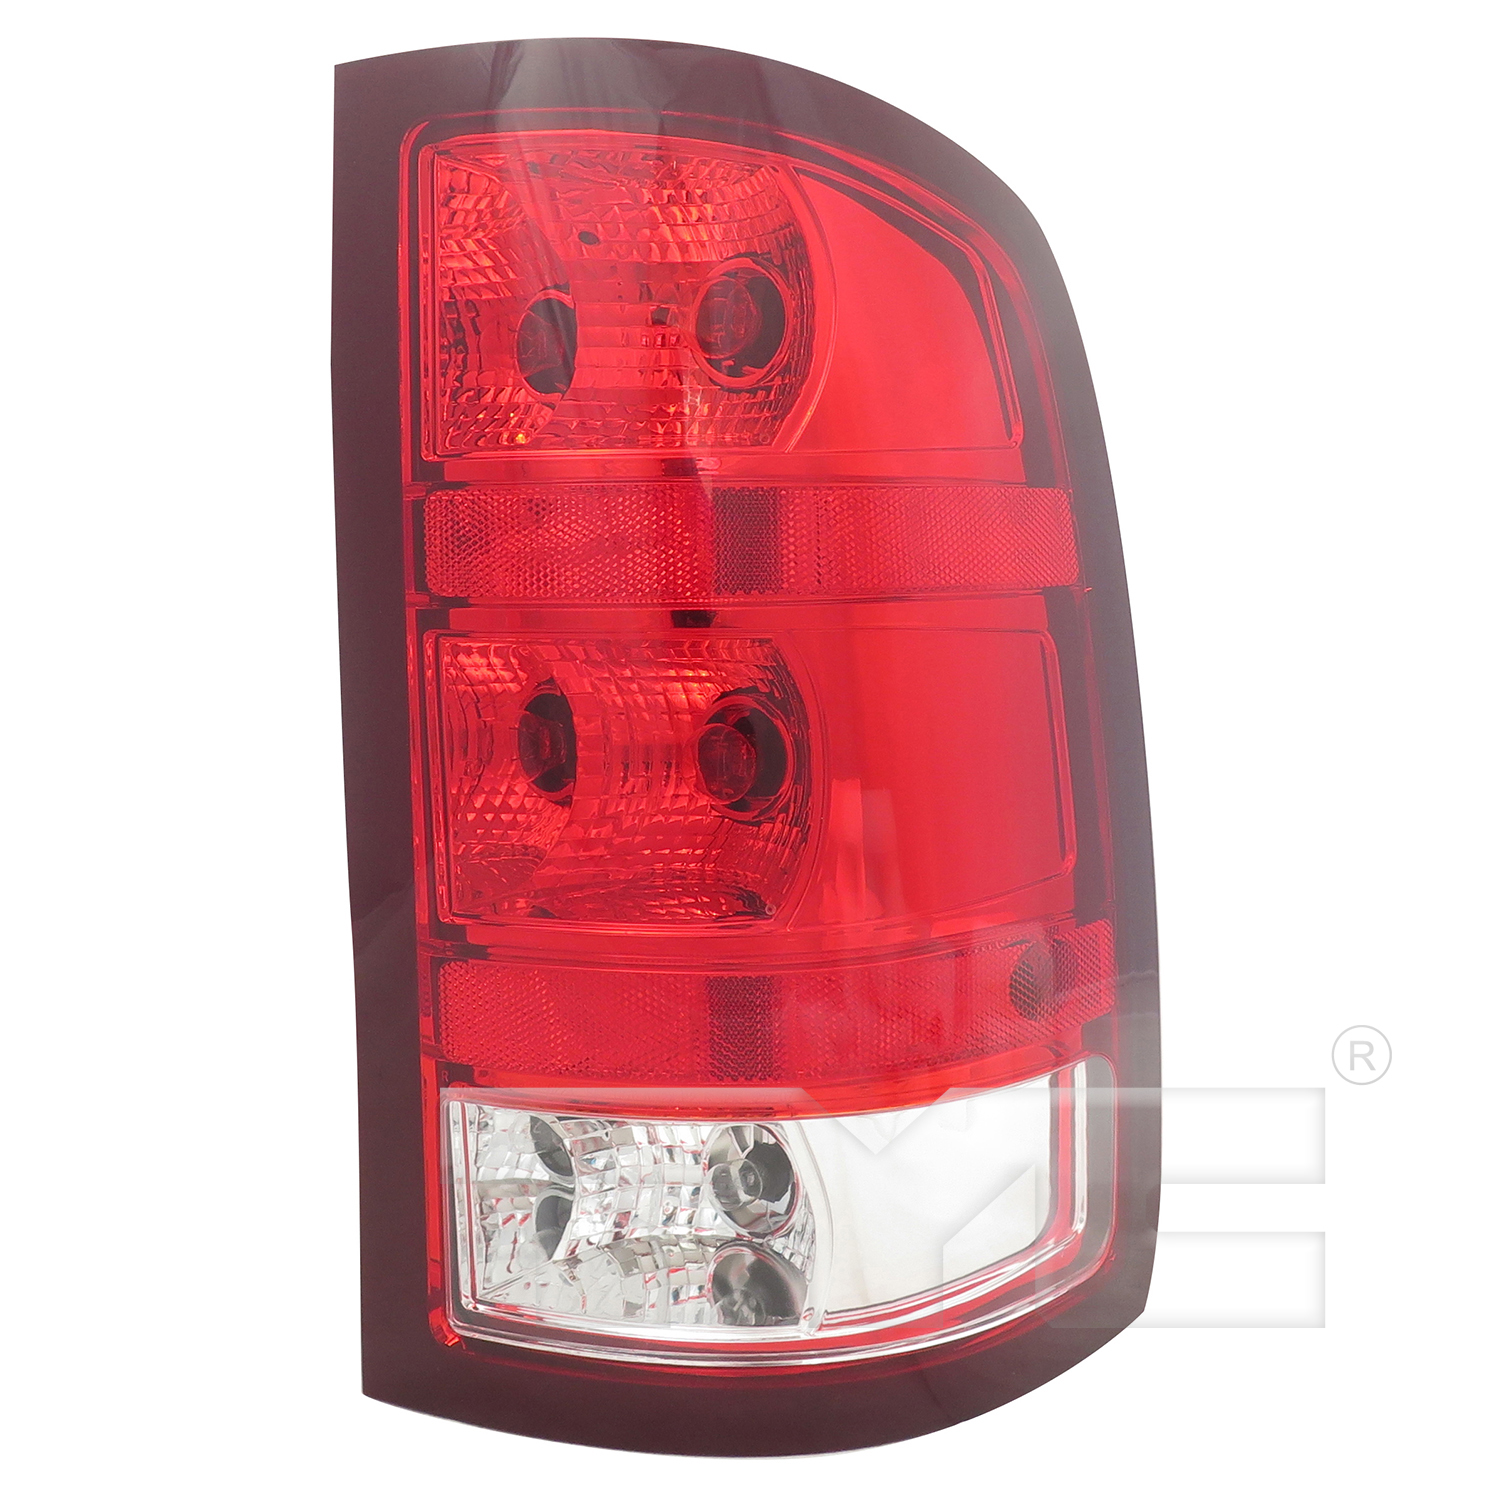 Aftermarket TAILLIGHTS for GMC - SIERRA 1500, SIERRA 1500,10-11,RT Taillamp assy